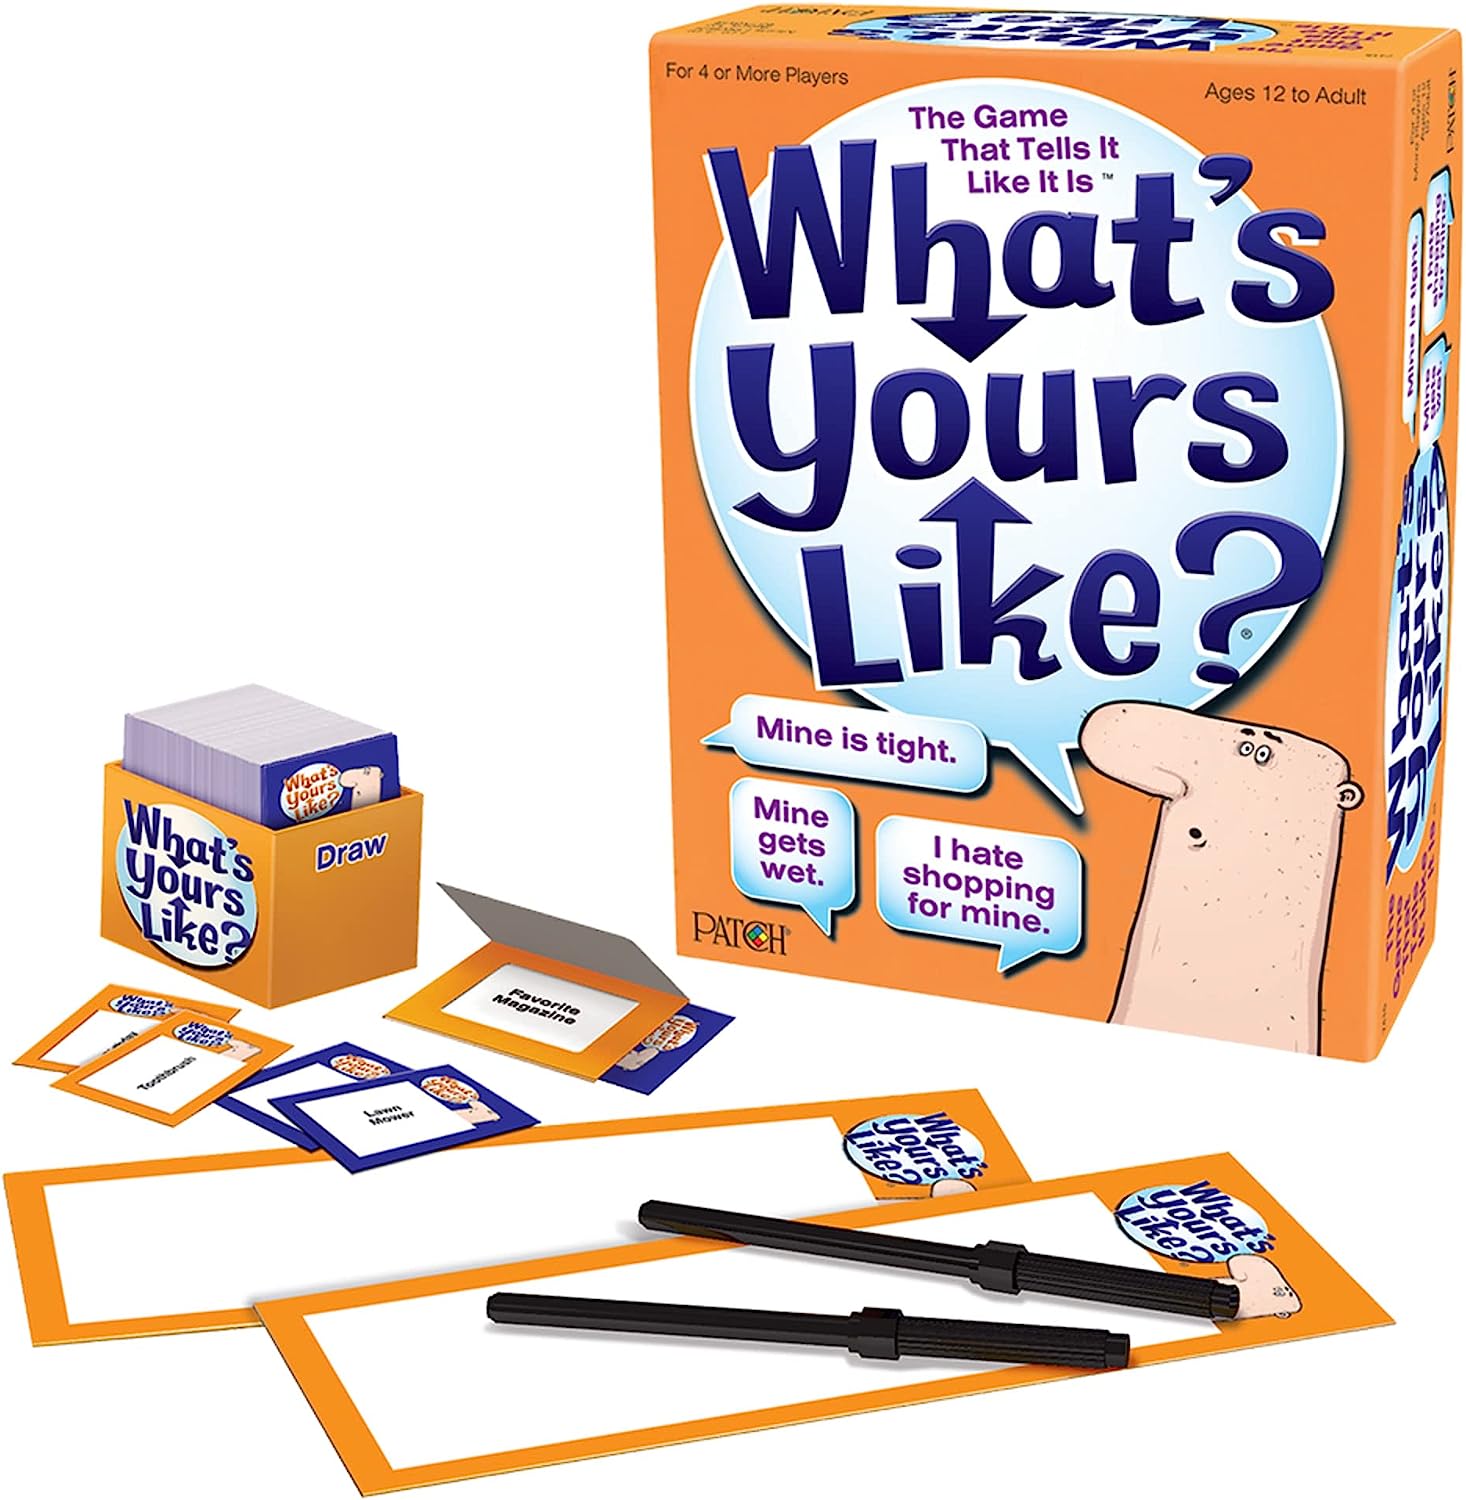 What's Yours Like? — Hilarious Party Card Game — Describe What Your Guess Word is Like — Ages 12+